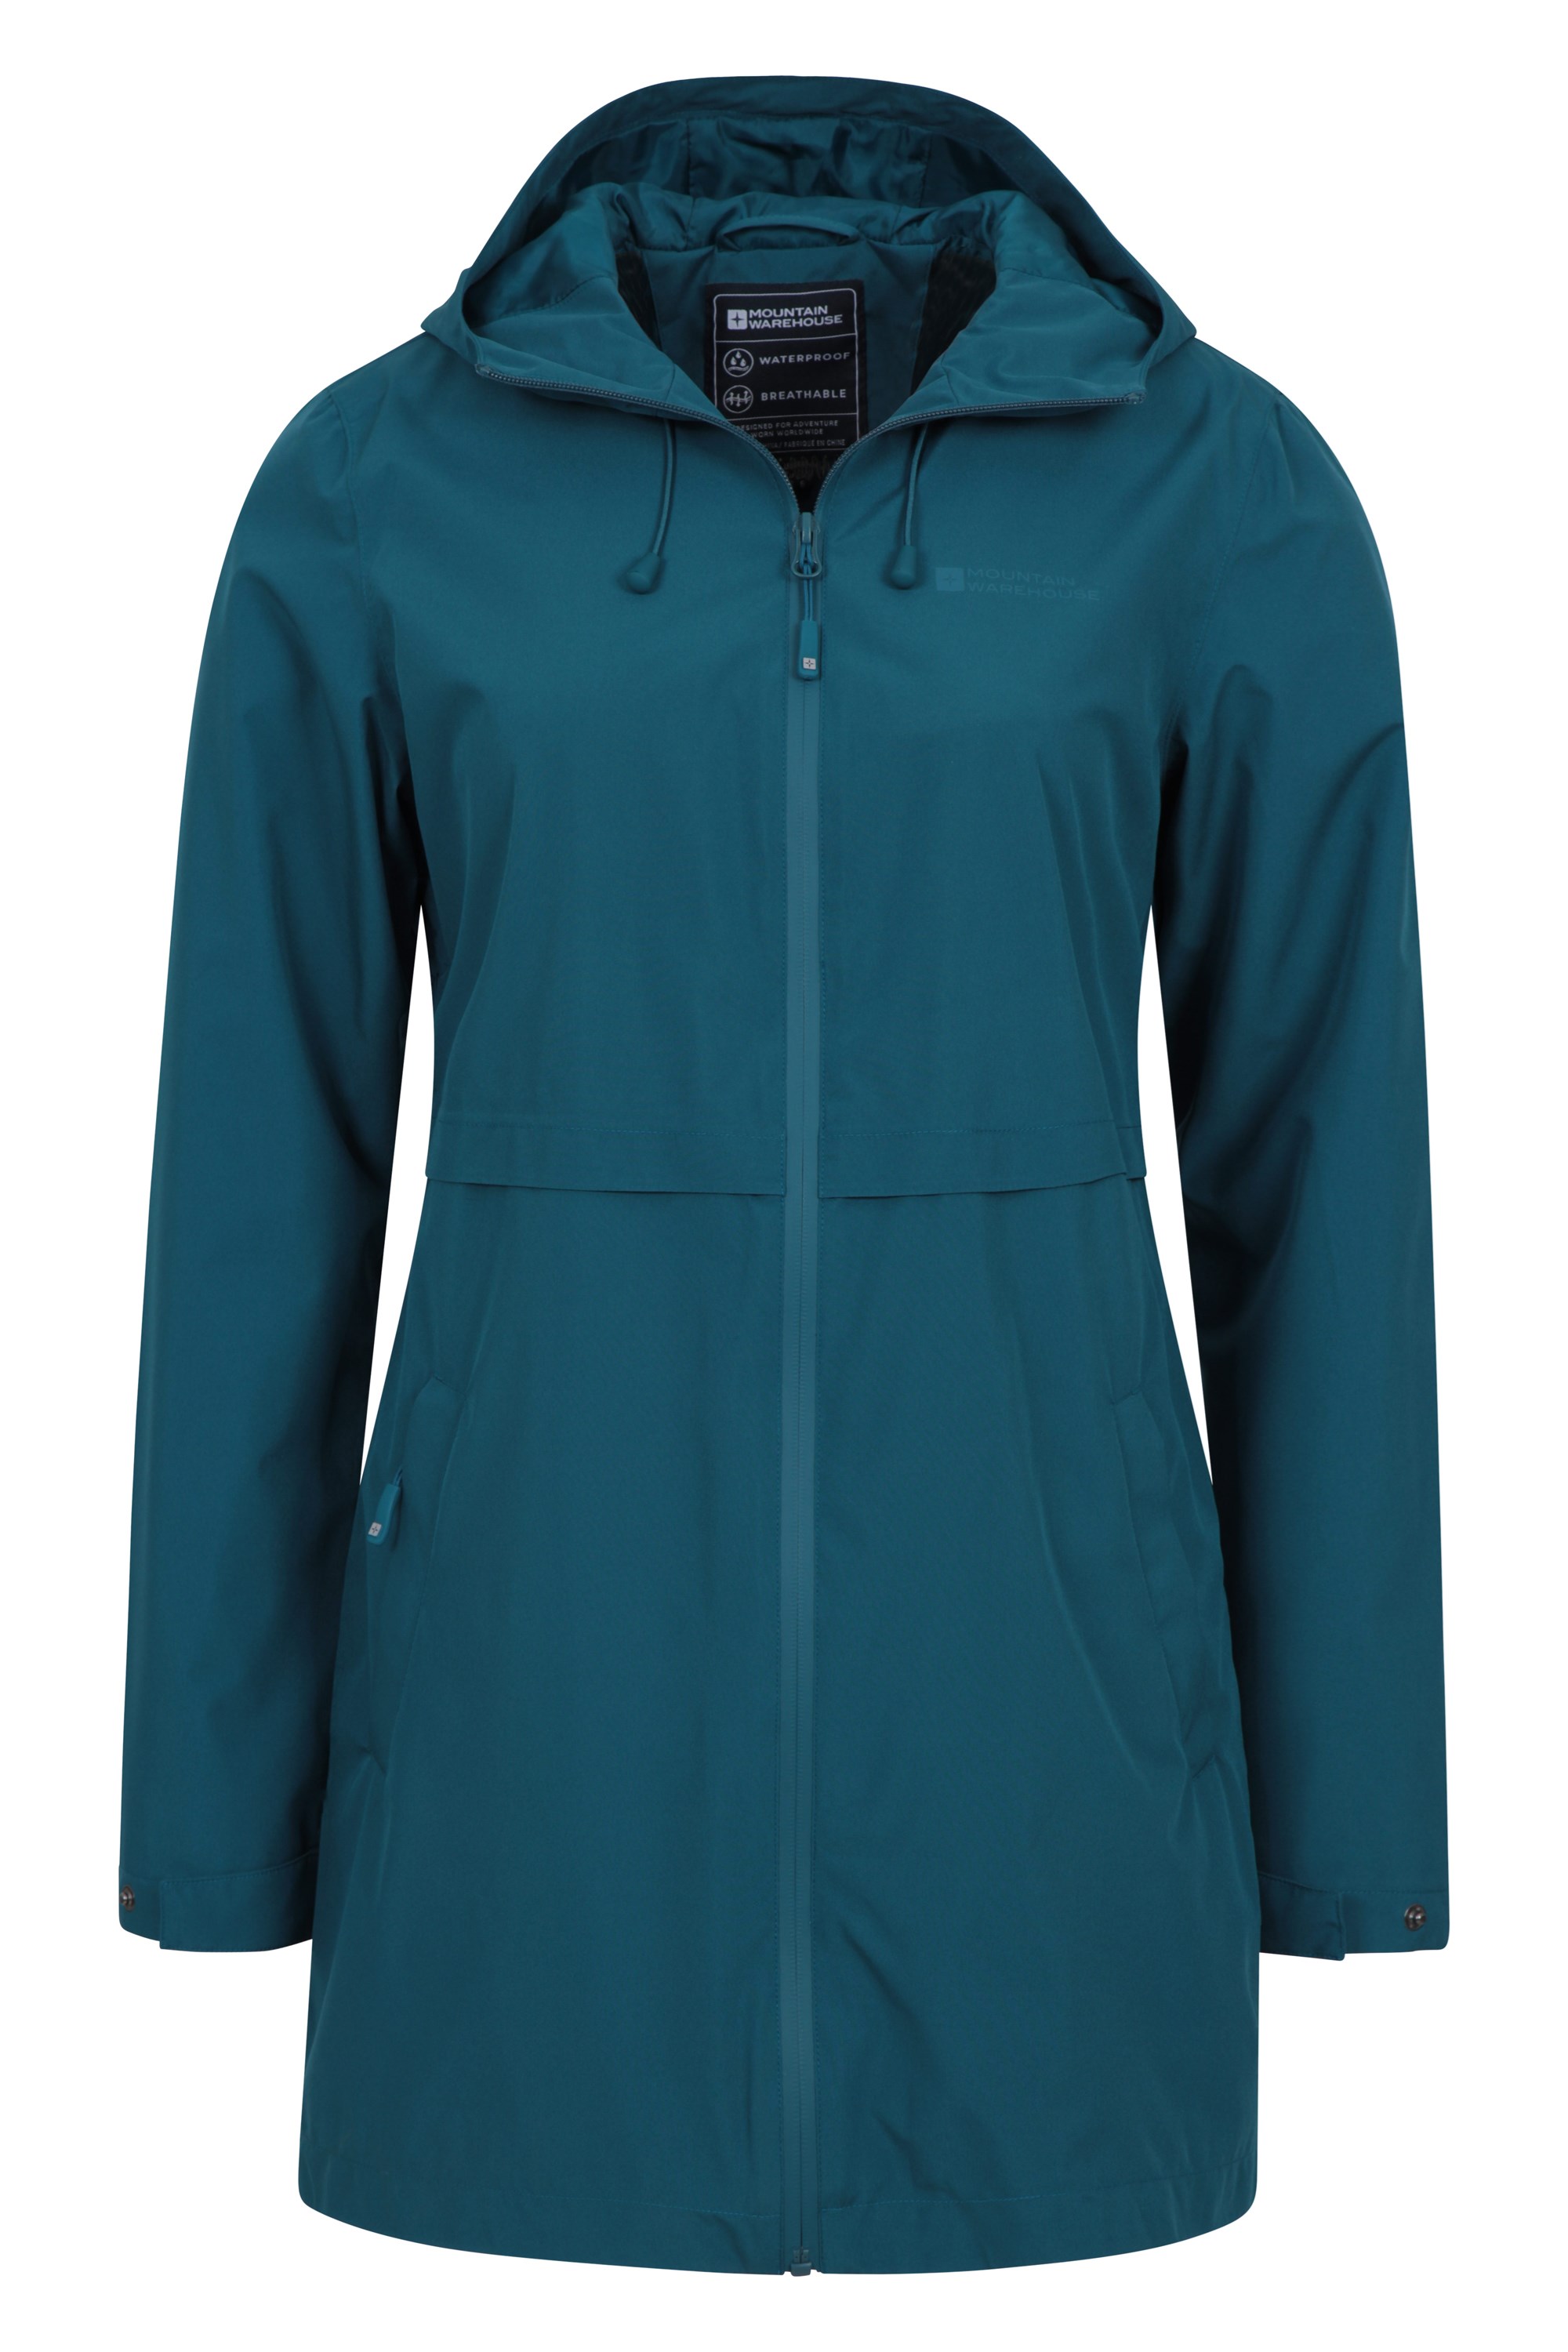 Mountain Warehouse Hilltop Womens Waterproof Jacket For Cycling Taped Seams Lightweight